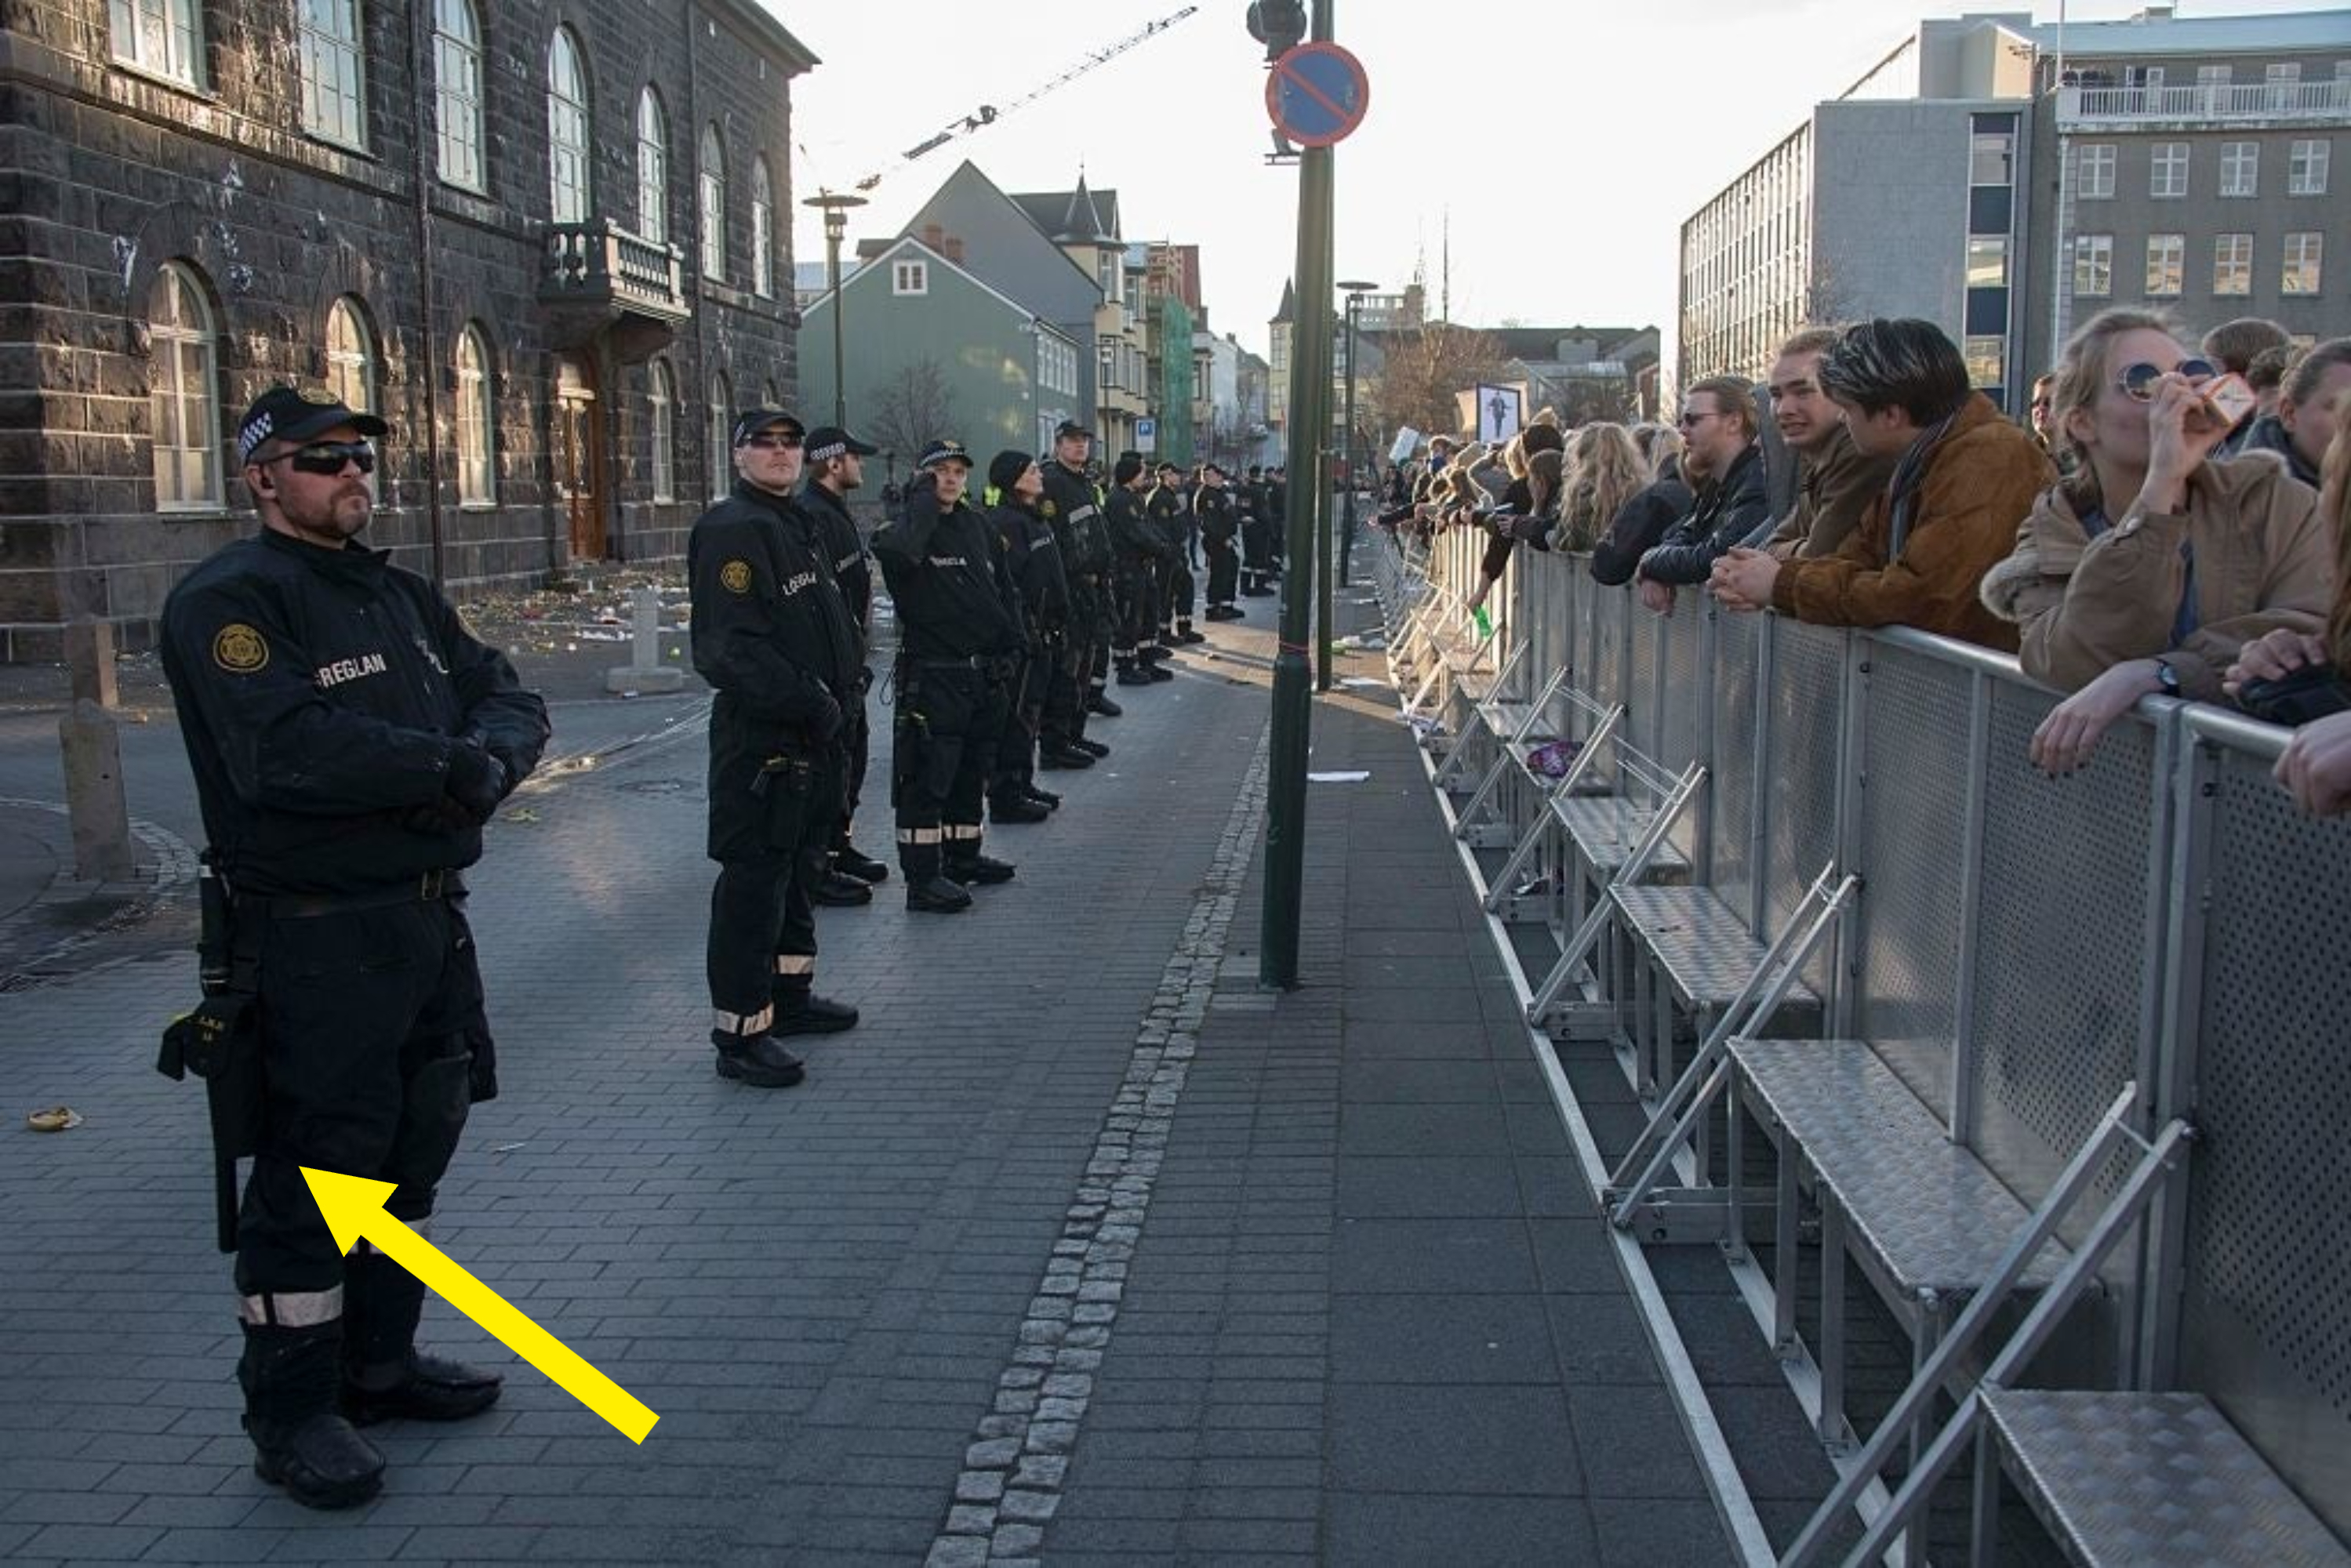 Police line the street with onlookers behind barriers, likely at a public event